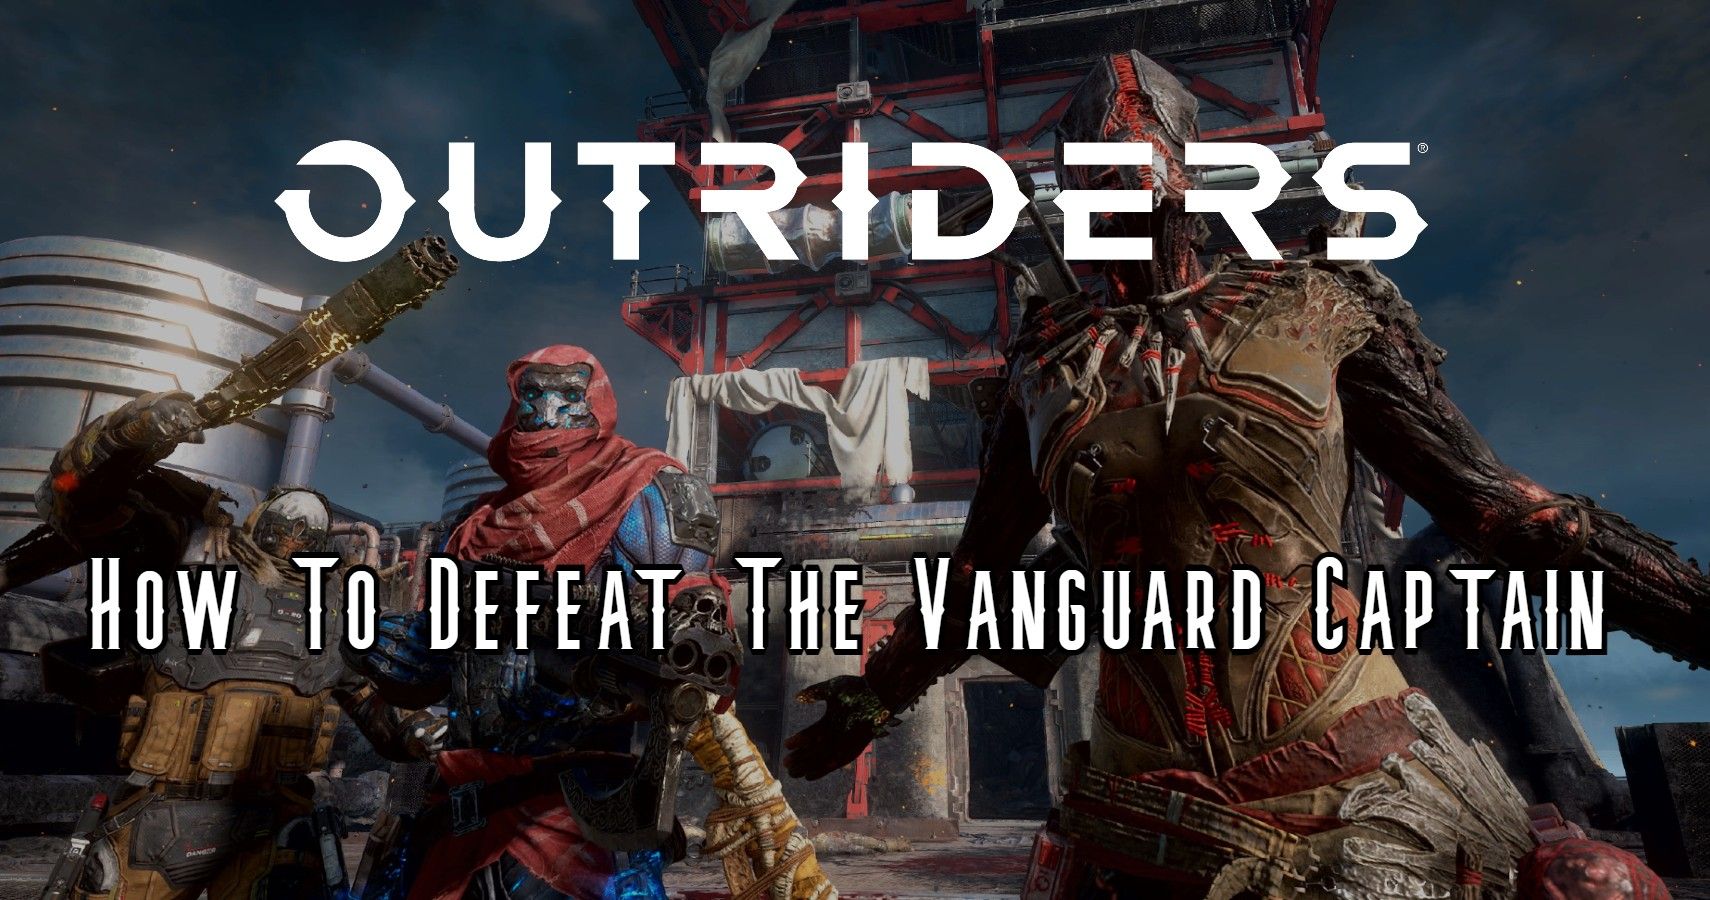 Outriders How To Defeat the Vanguard Captain